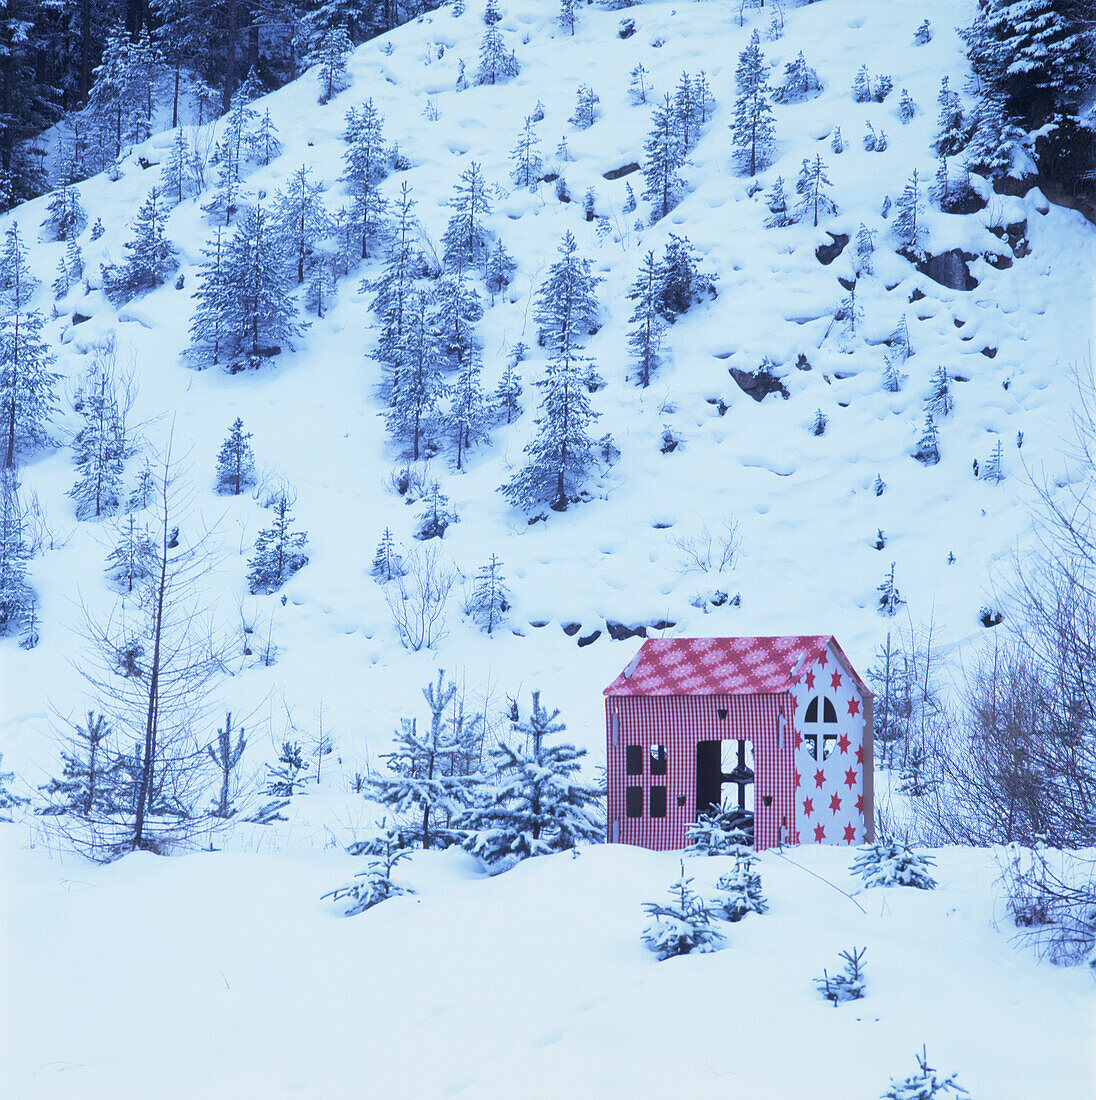 Festive play house decorated with fabrics and wallpaper in snowy mountains